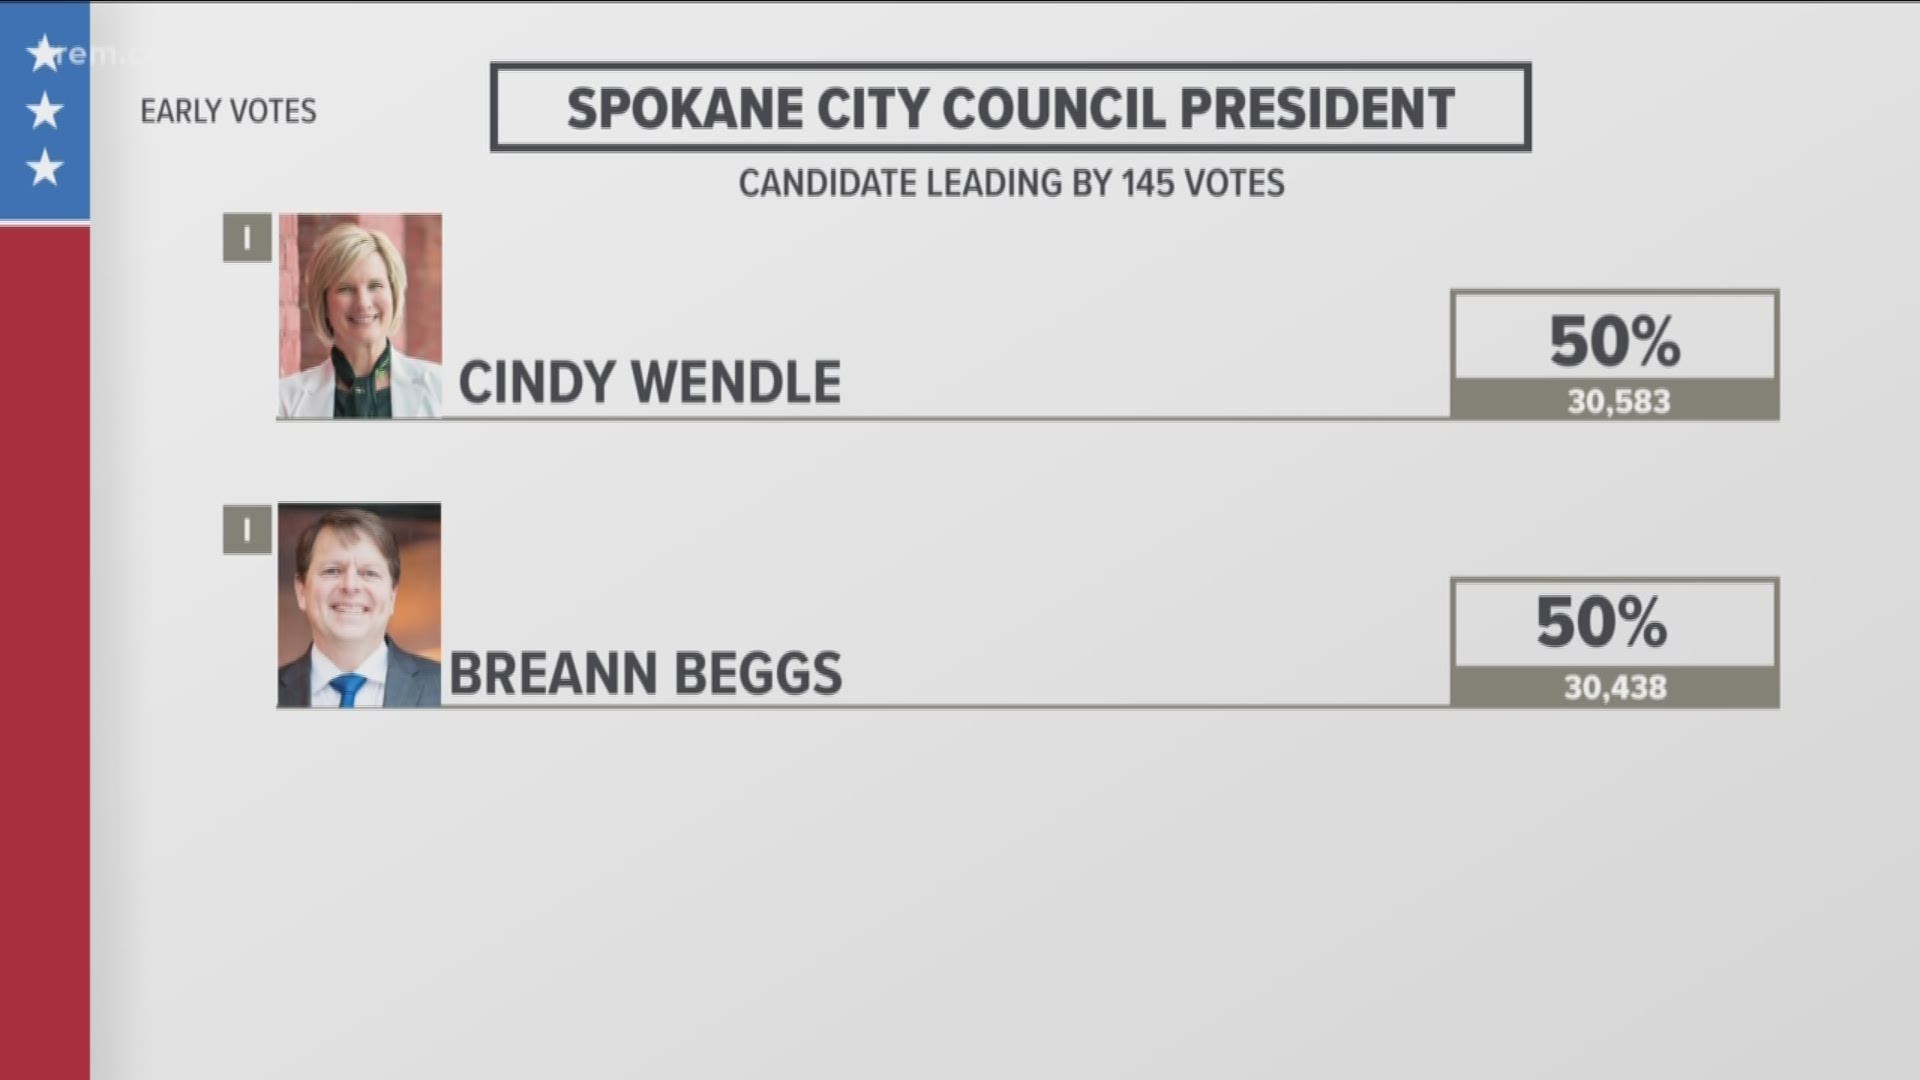 Beggs has received 49.80 percent of votes so far. Wendle has received 49.79 percent.